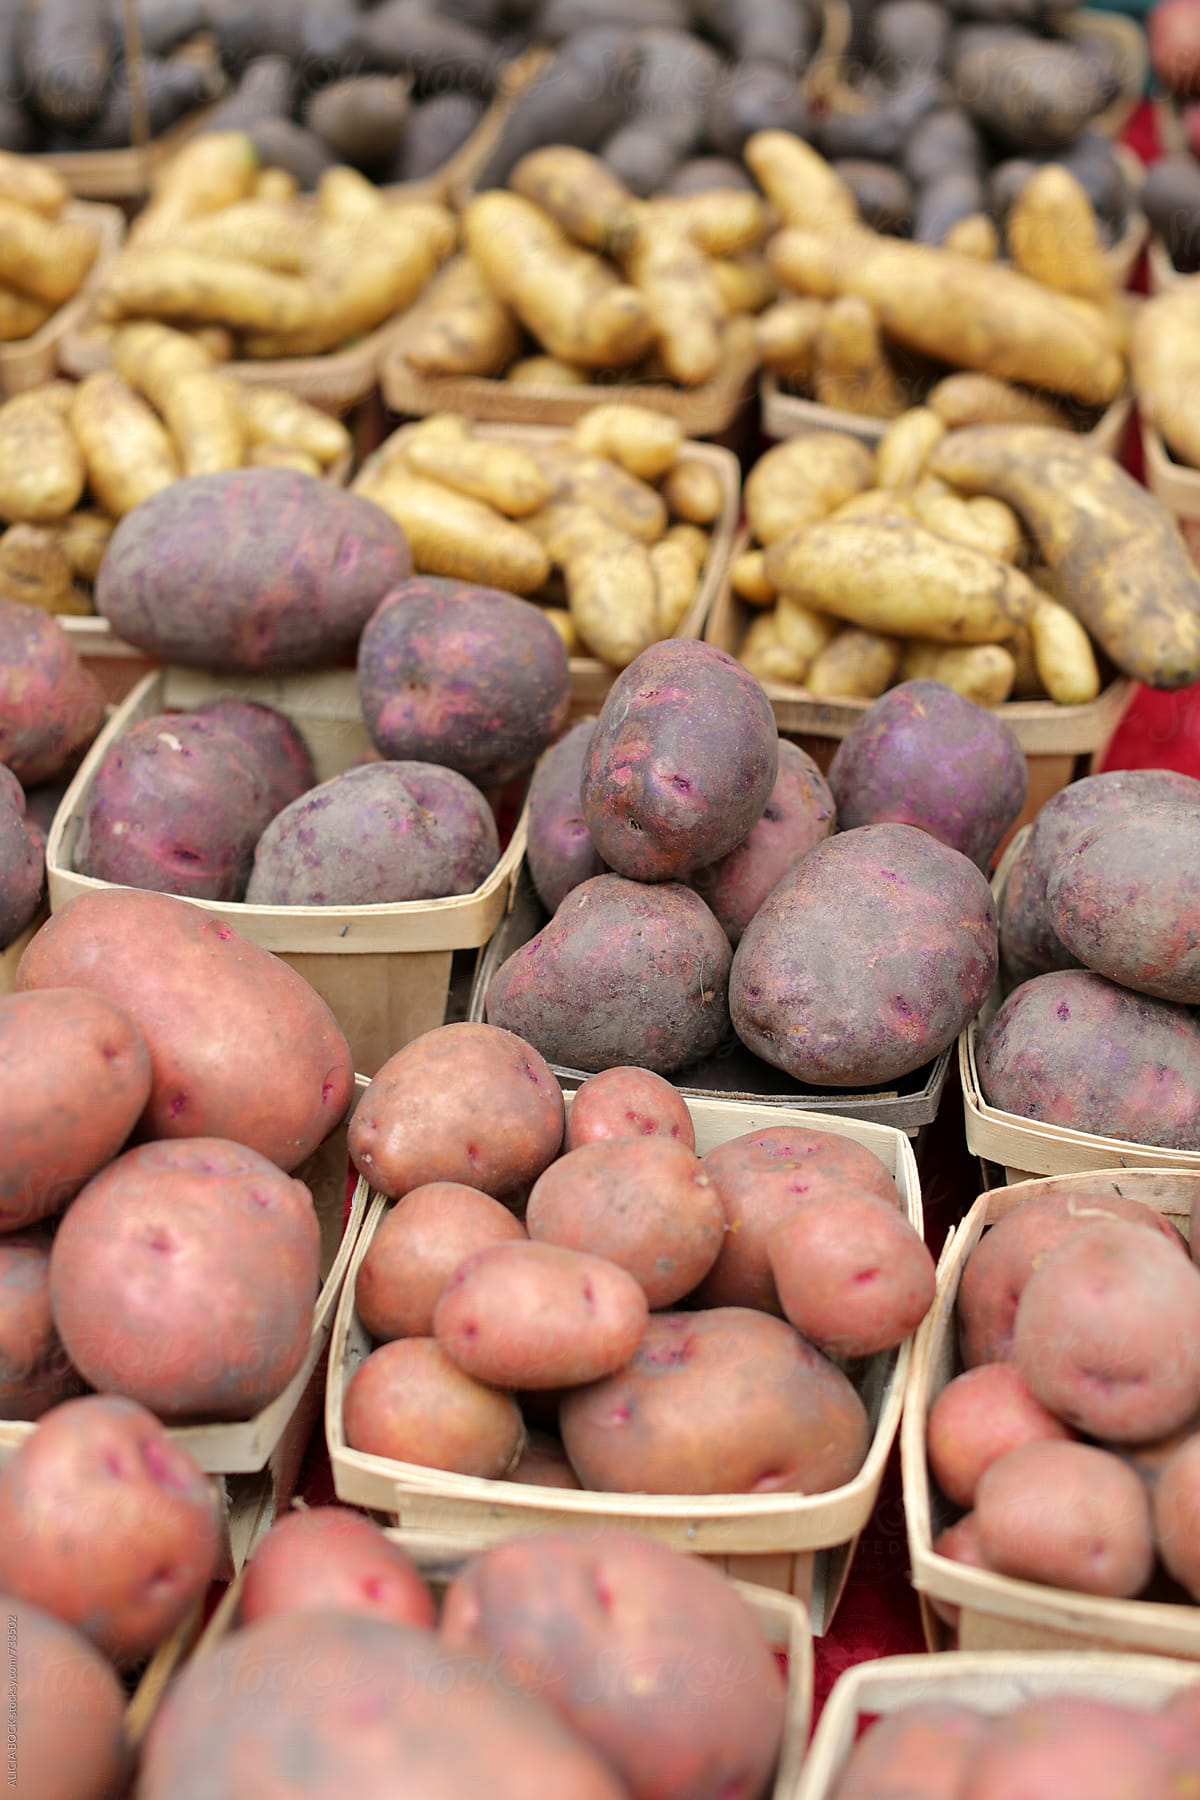 Rows Of Colorful Potatoes For Sale At A Farmer's Market